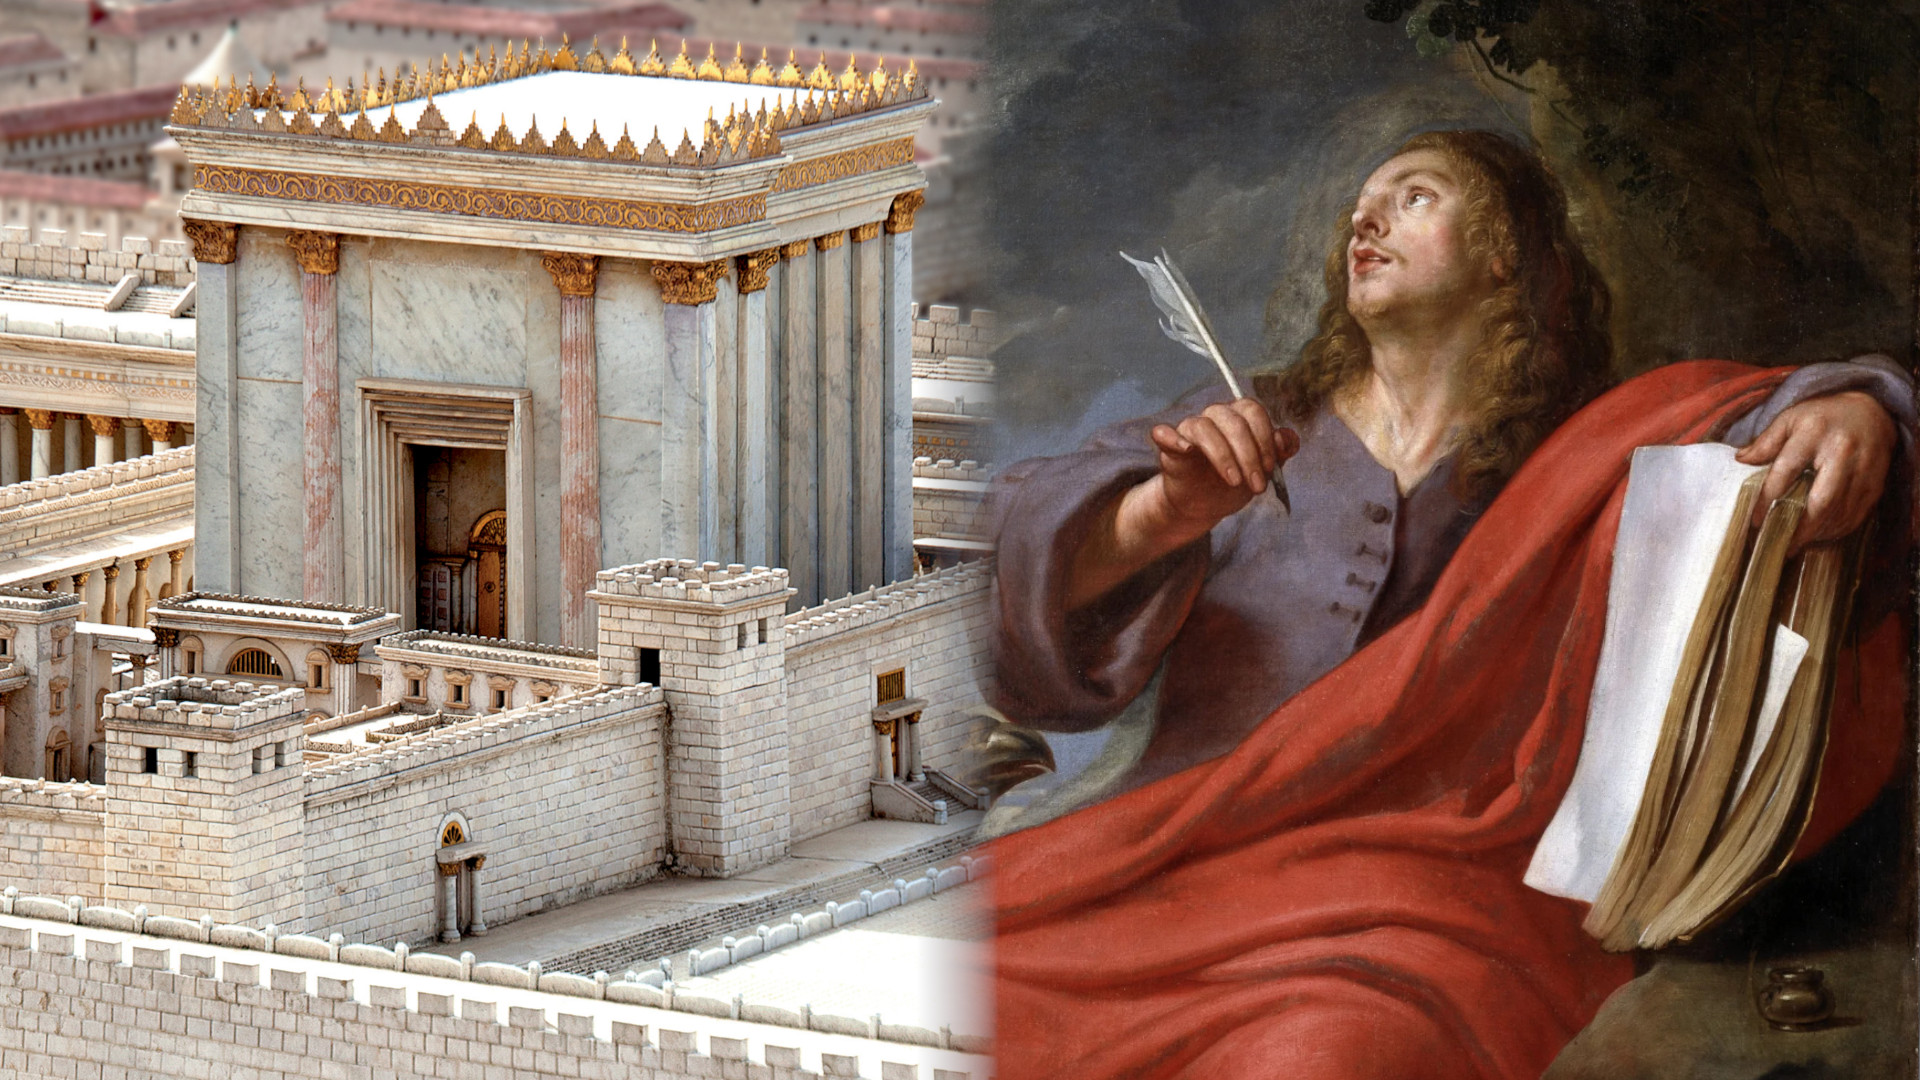 Left, a model of King Herod's Temple. Image from The Church of Jesus Christ of Latter-day Saints. Right, “Saint John Writes the Book Revelation on the Isle of Patmos” by Gaspar de Crayer. Public Domain.